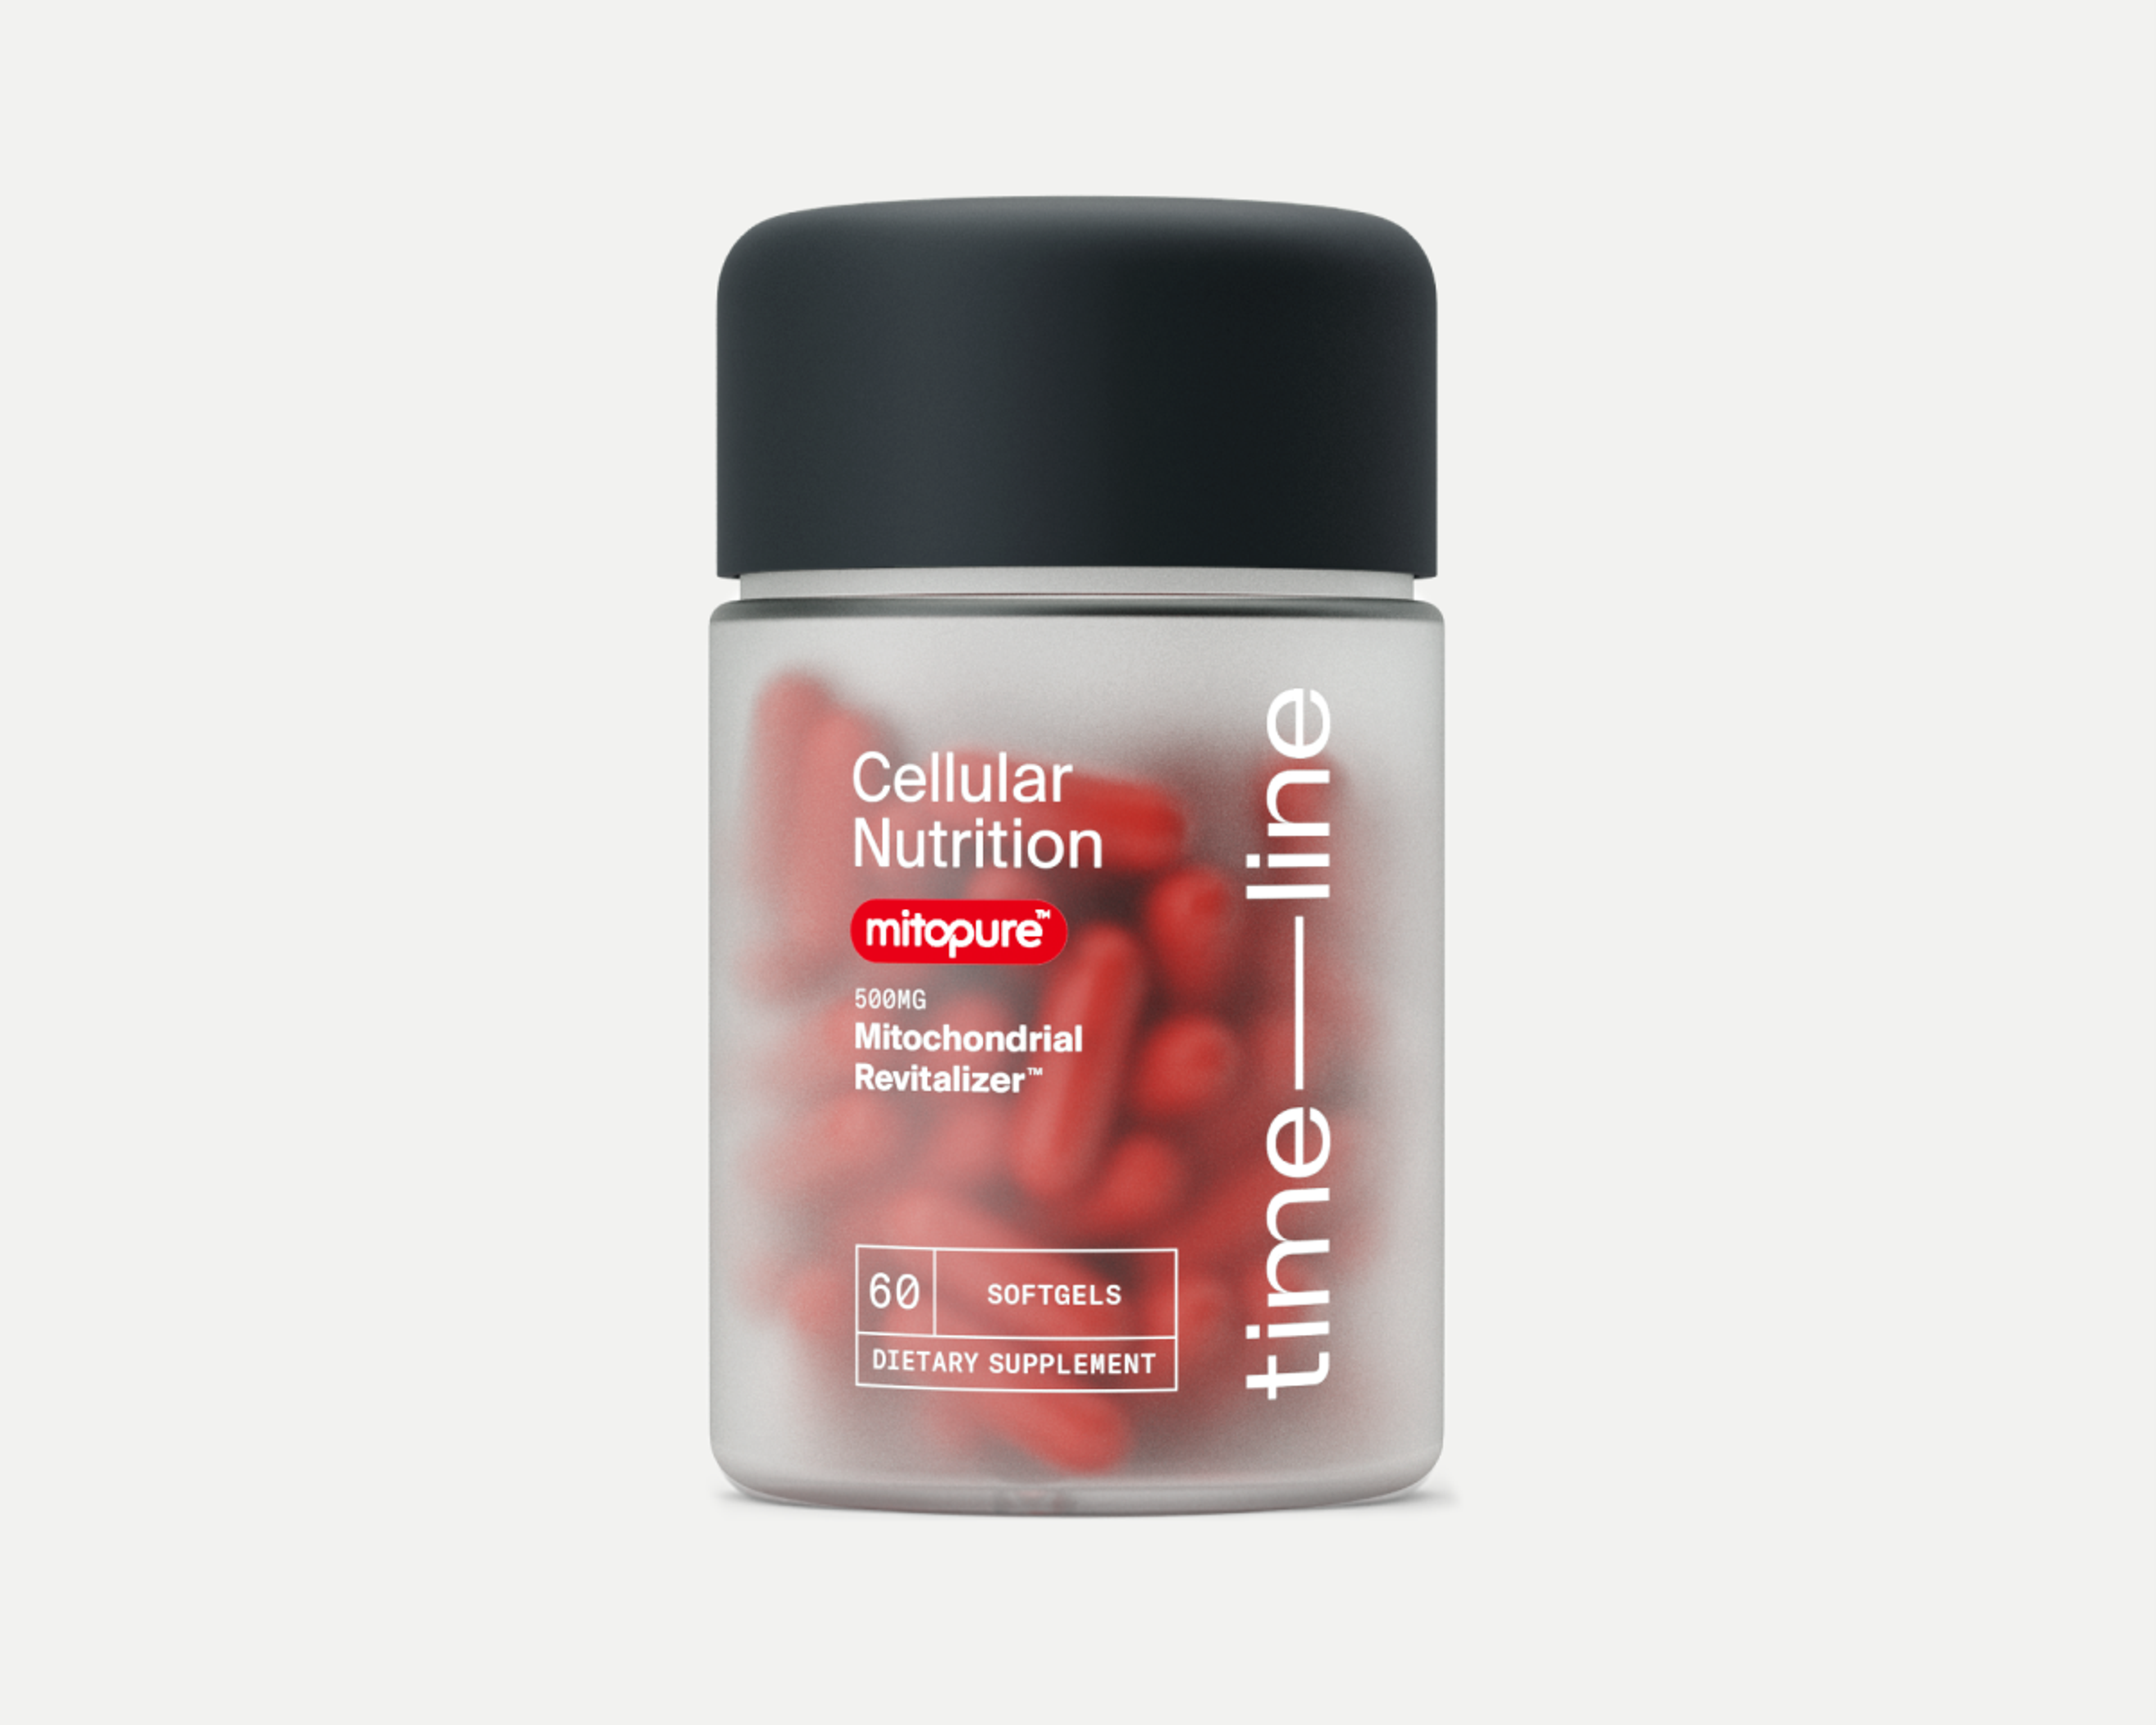 Mitopure soft gels product image